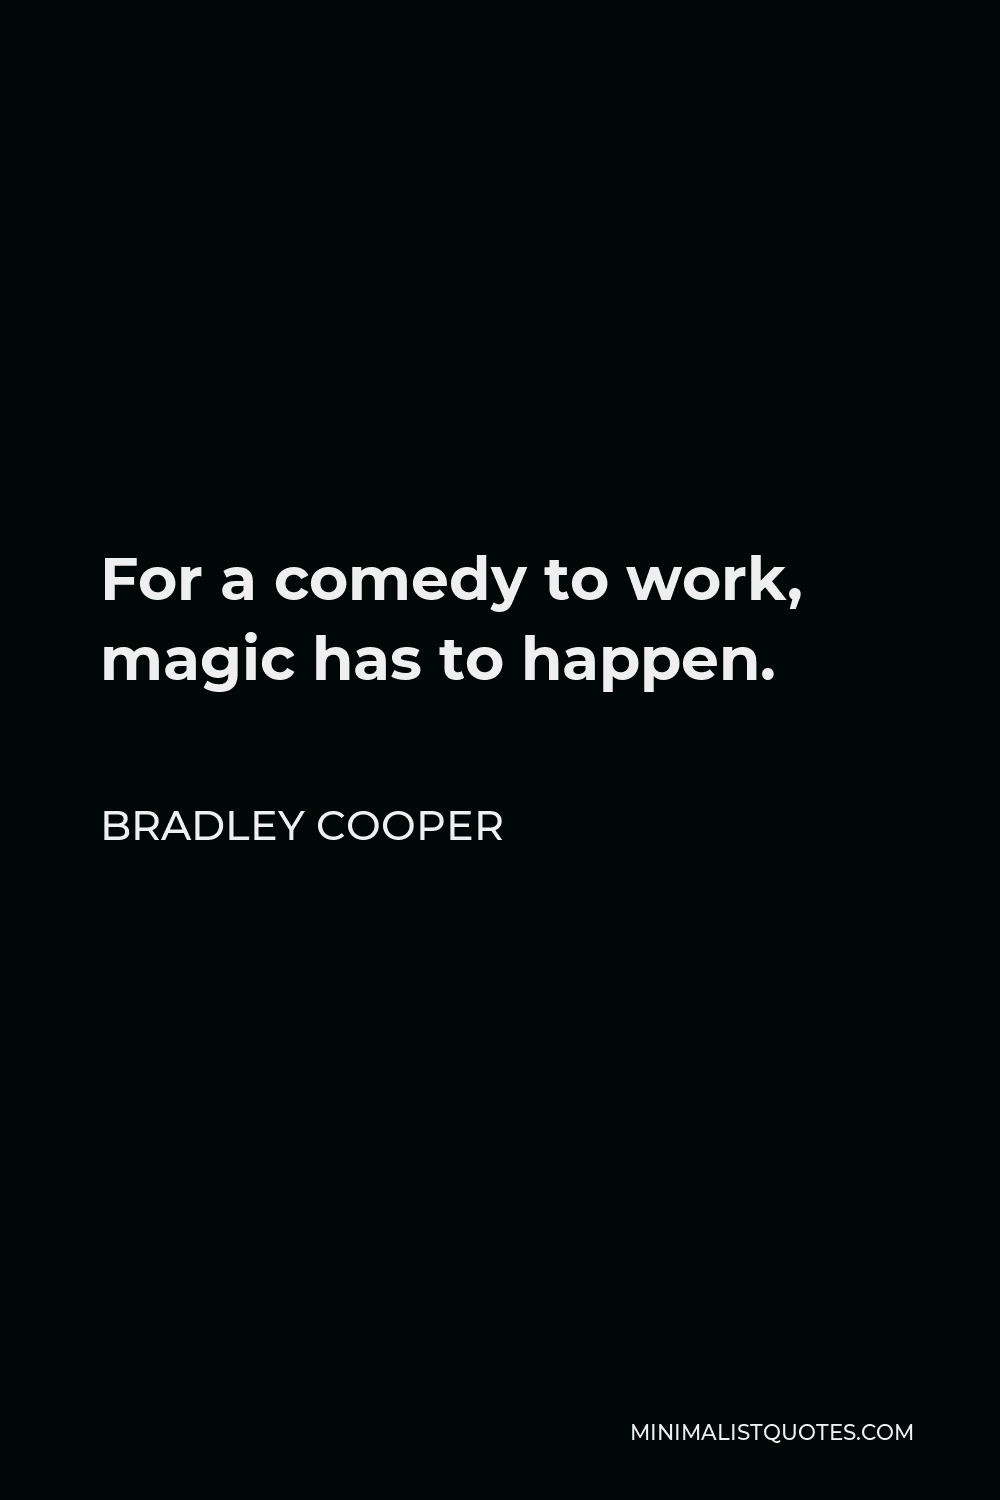 Bradley Cooper Quote - For a comedy to work, magic has to happen.